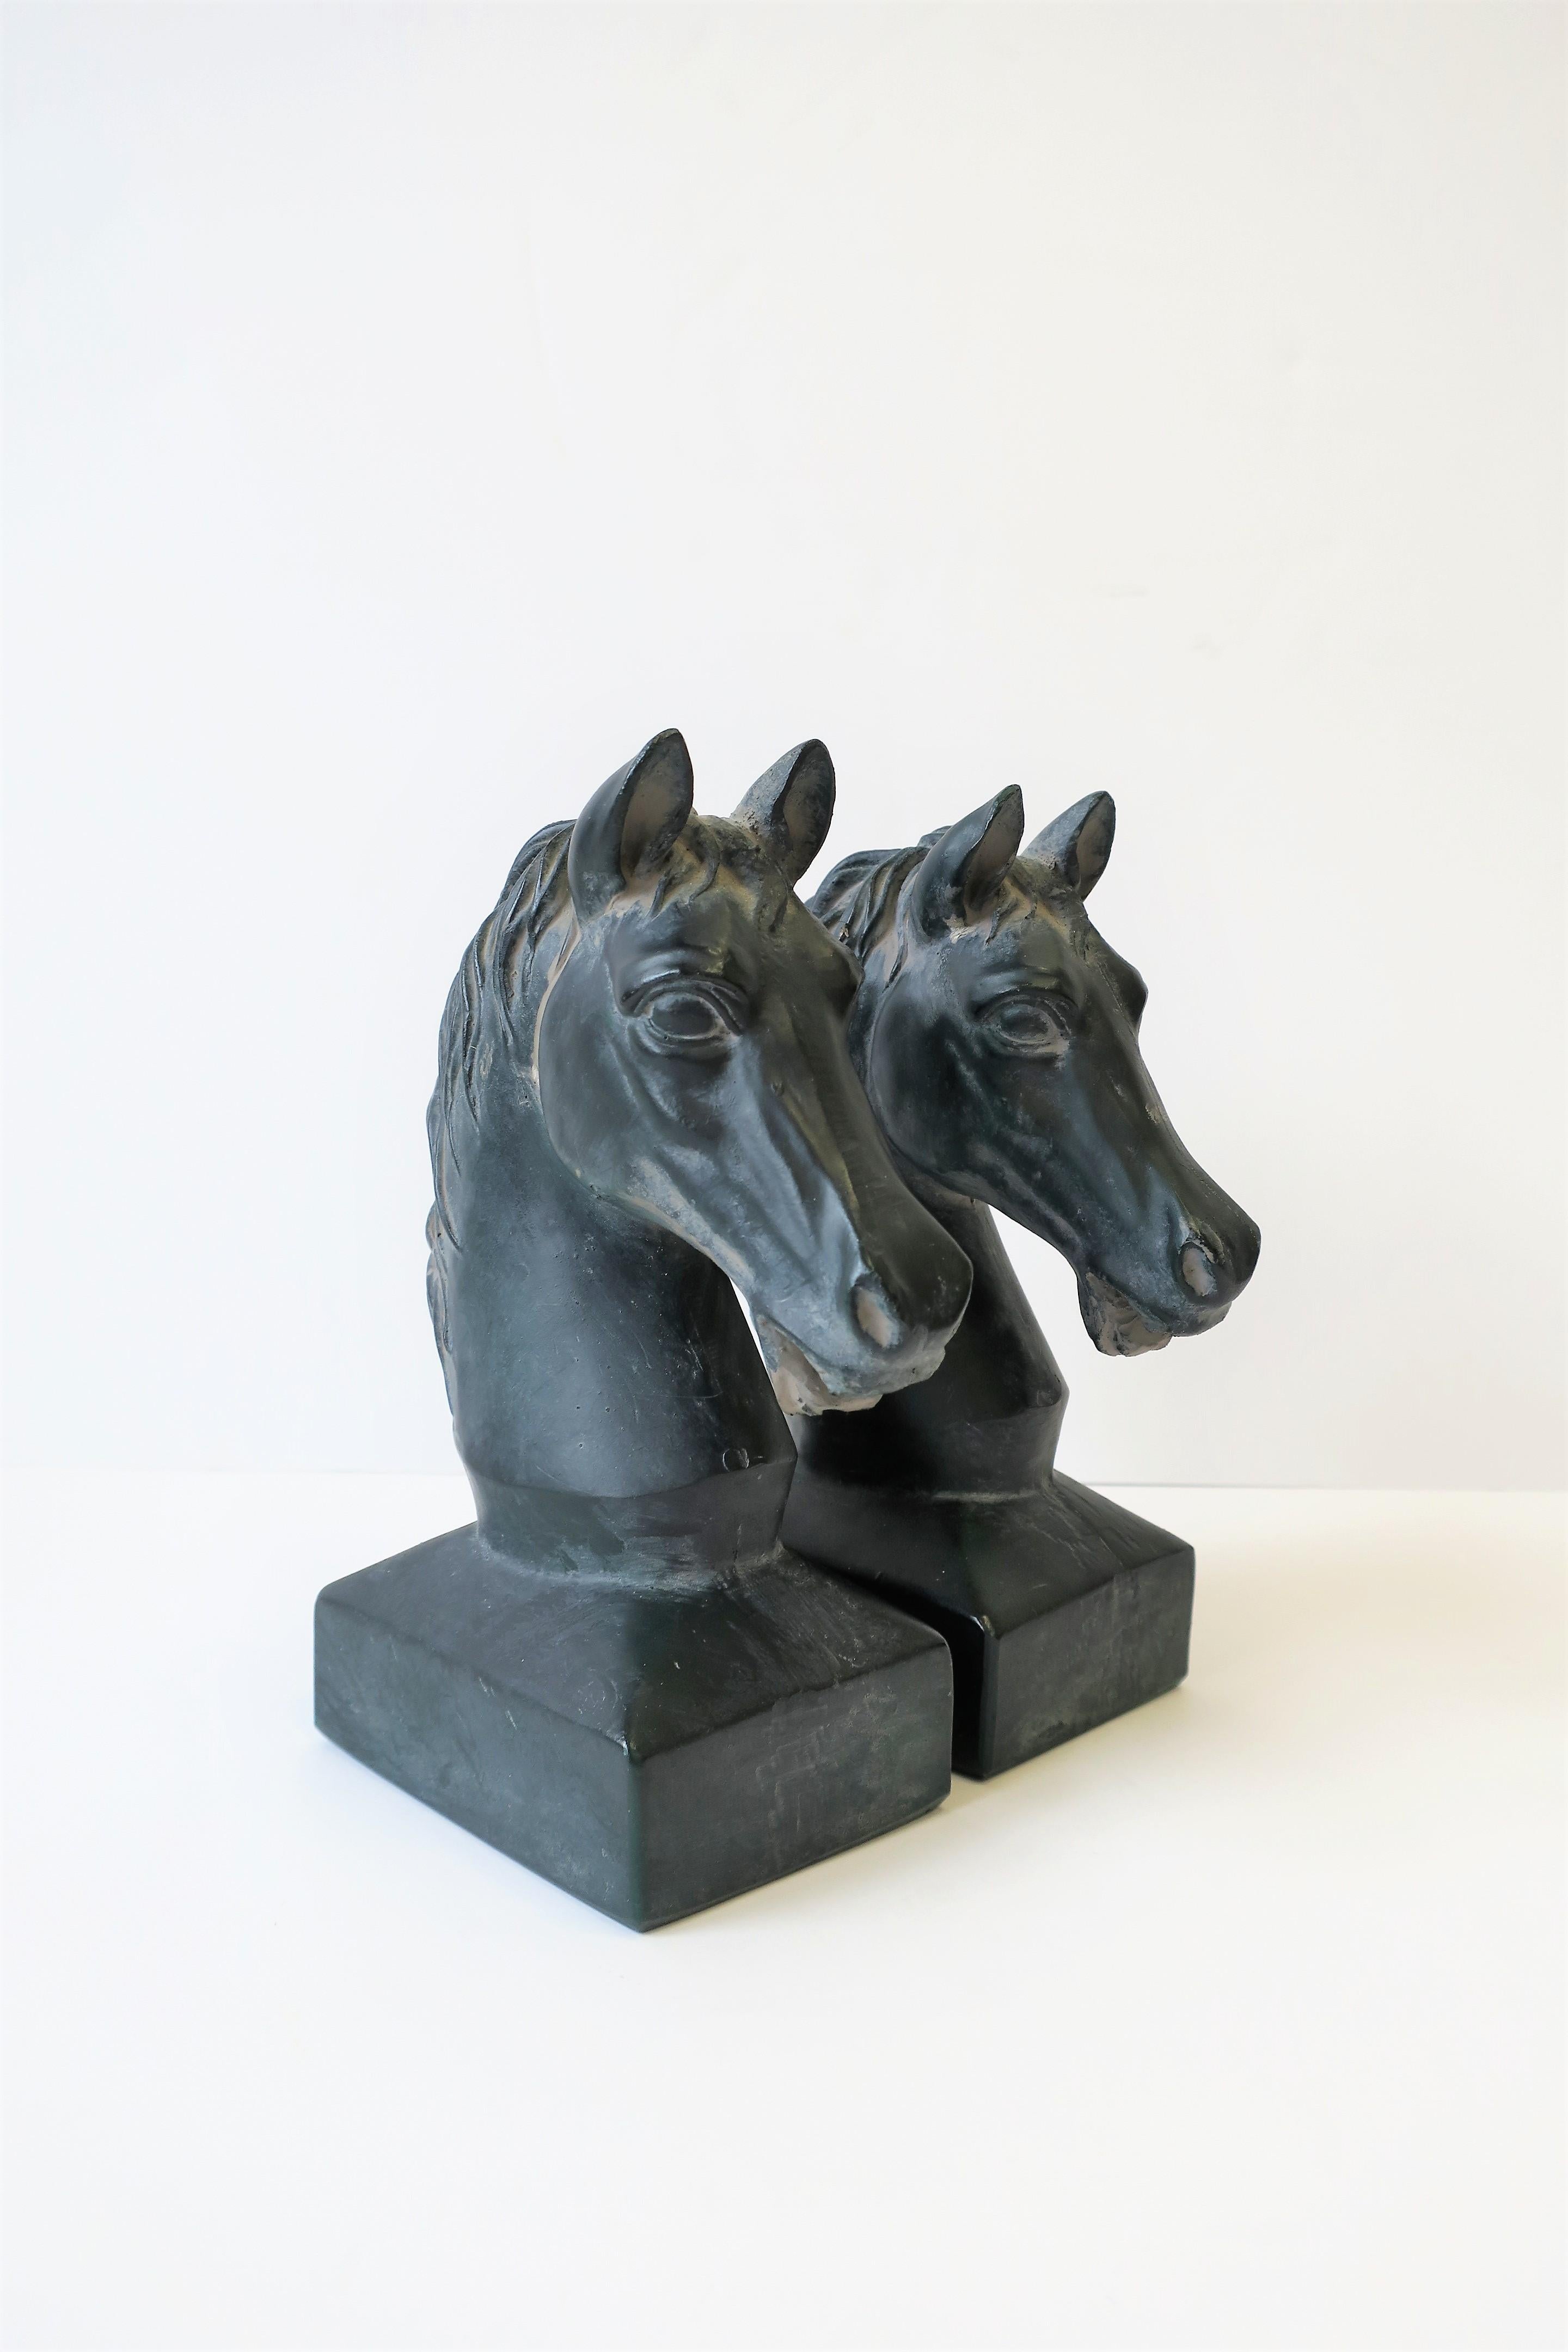 Molded Pair of Vintage Horse or Equine Bookends